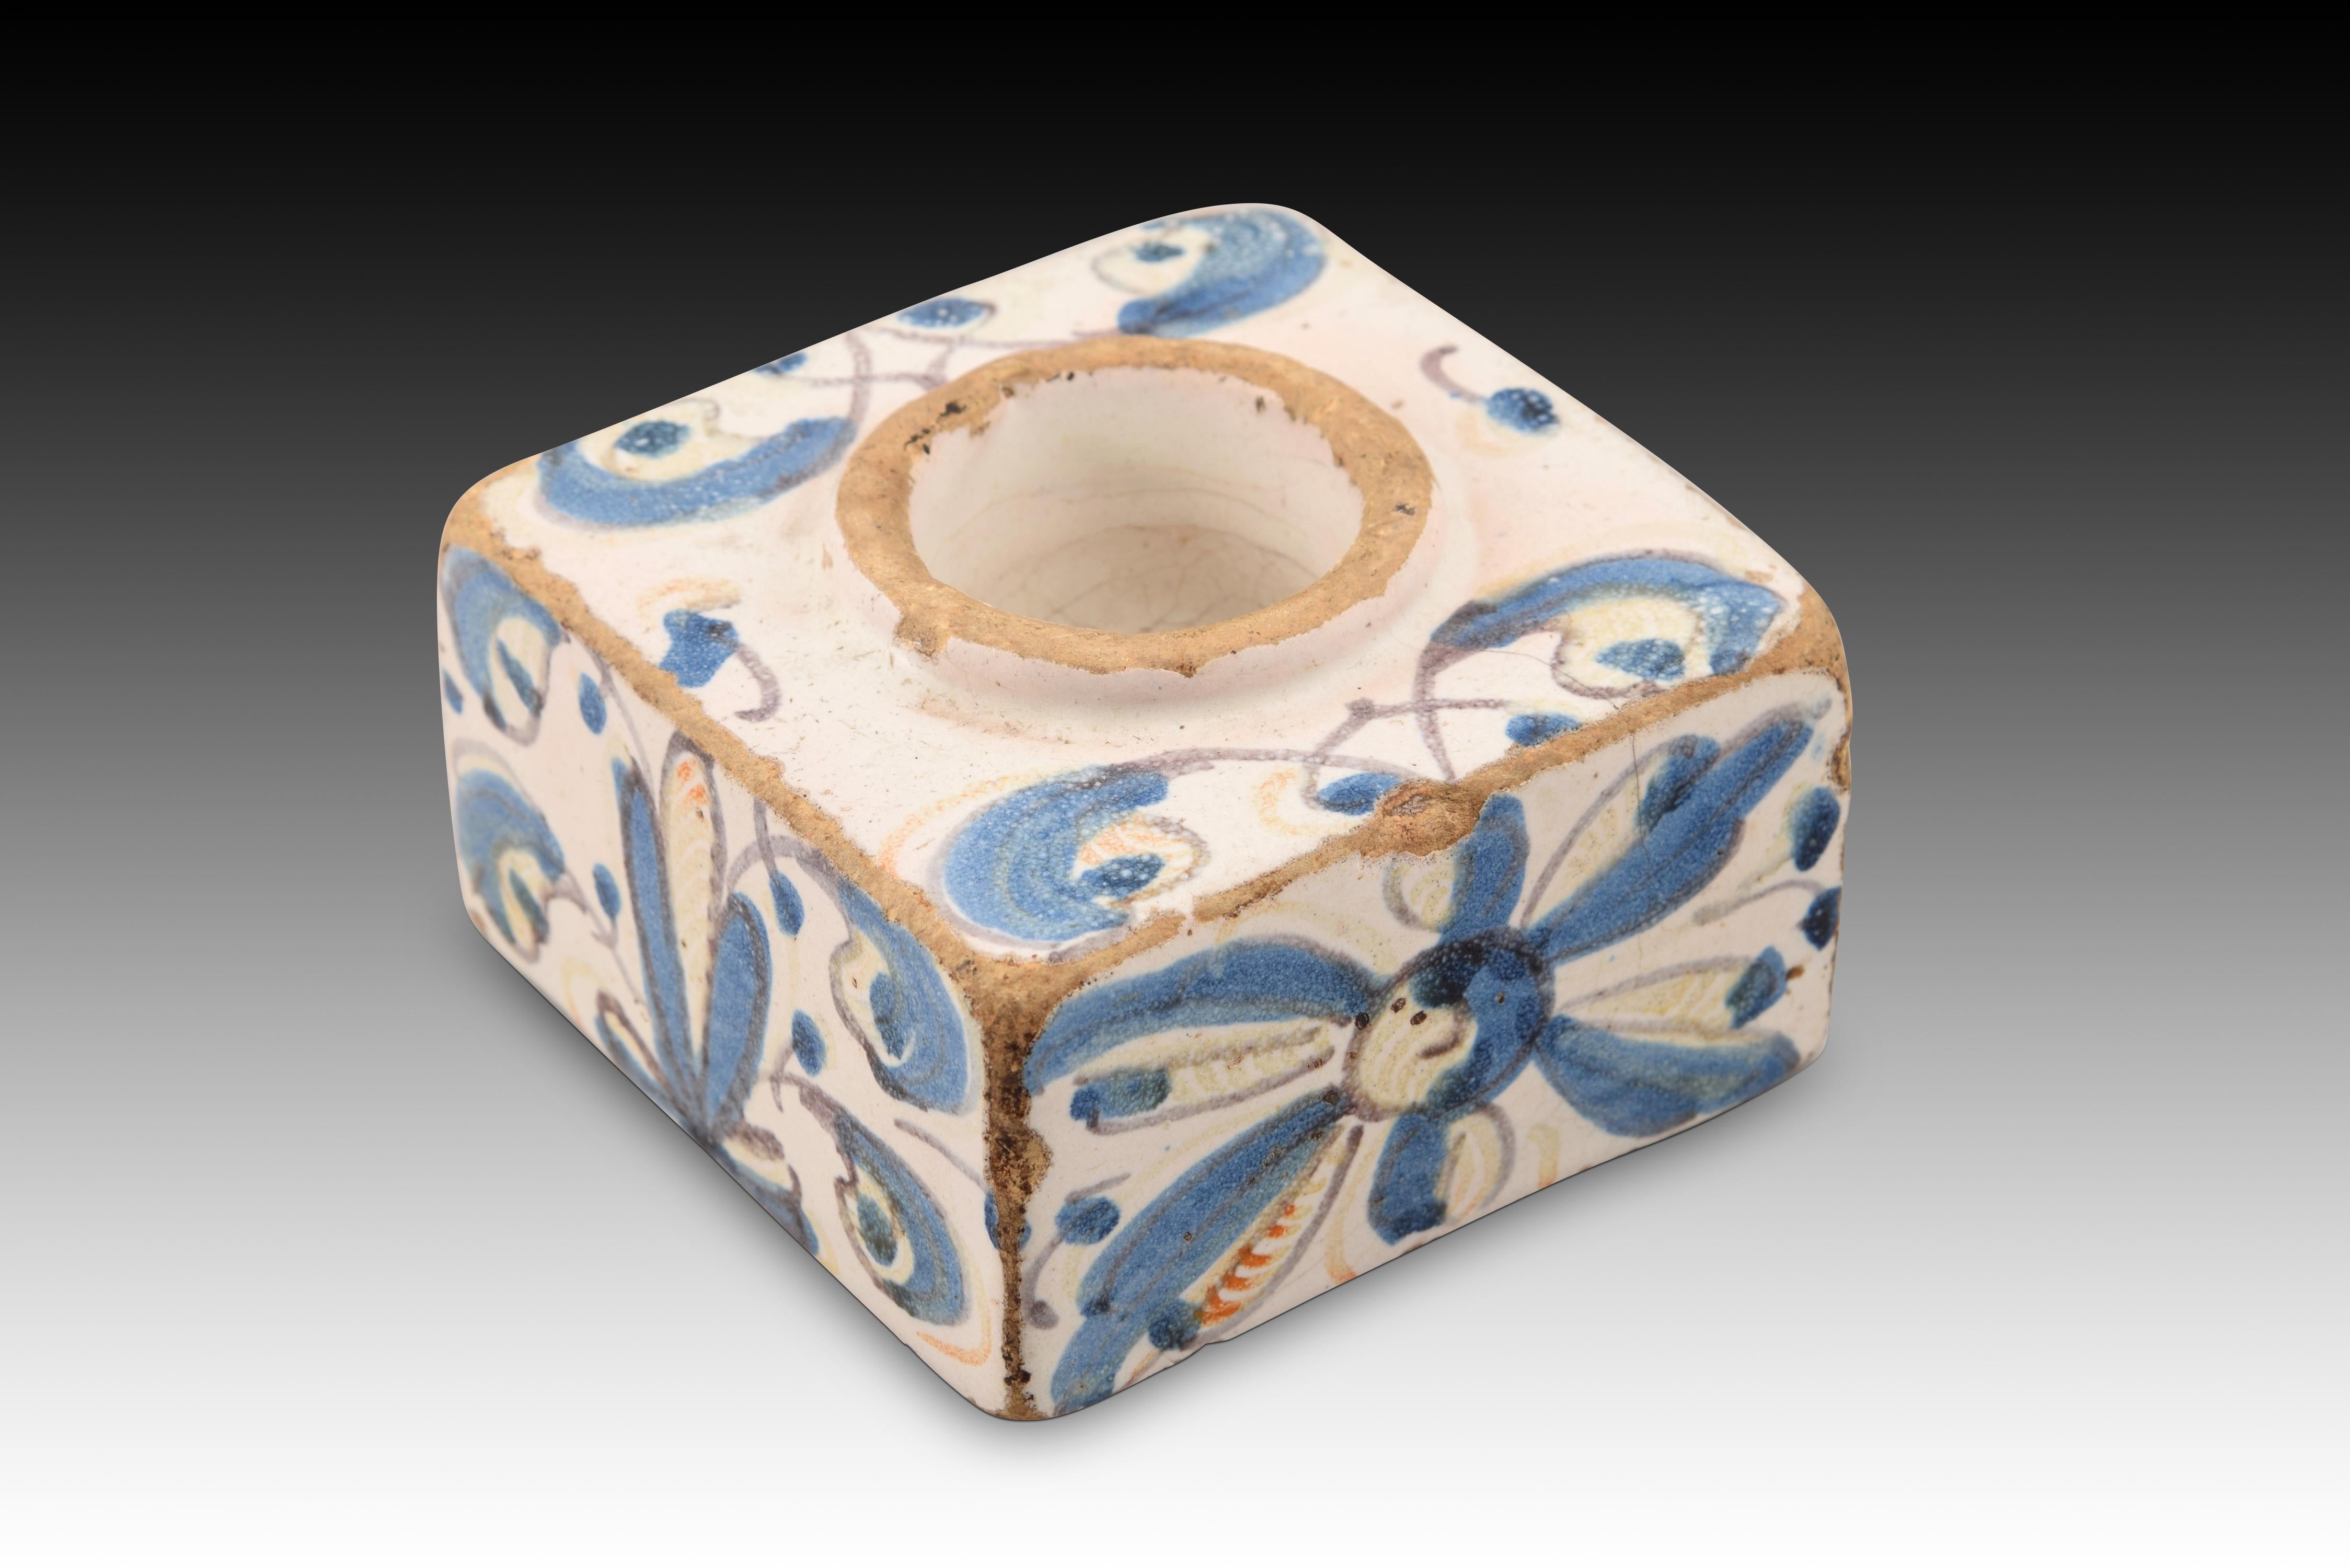 Inkwell. Glazed ceramic. Talavera de la Reina, Spain, 17th century. 
Inkwell or spice rack with a square shaped hole that is made of glazed ceramic and a polychrome decoration of plant elements on the upper part and its fronts. Due to the colors